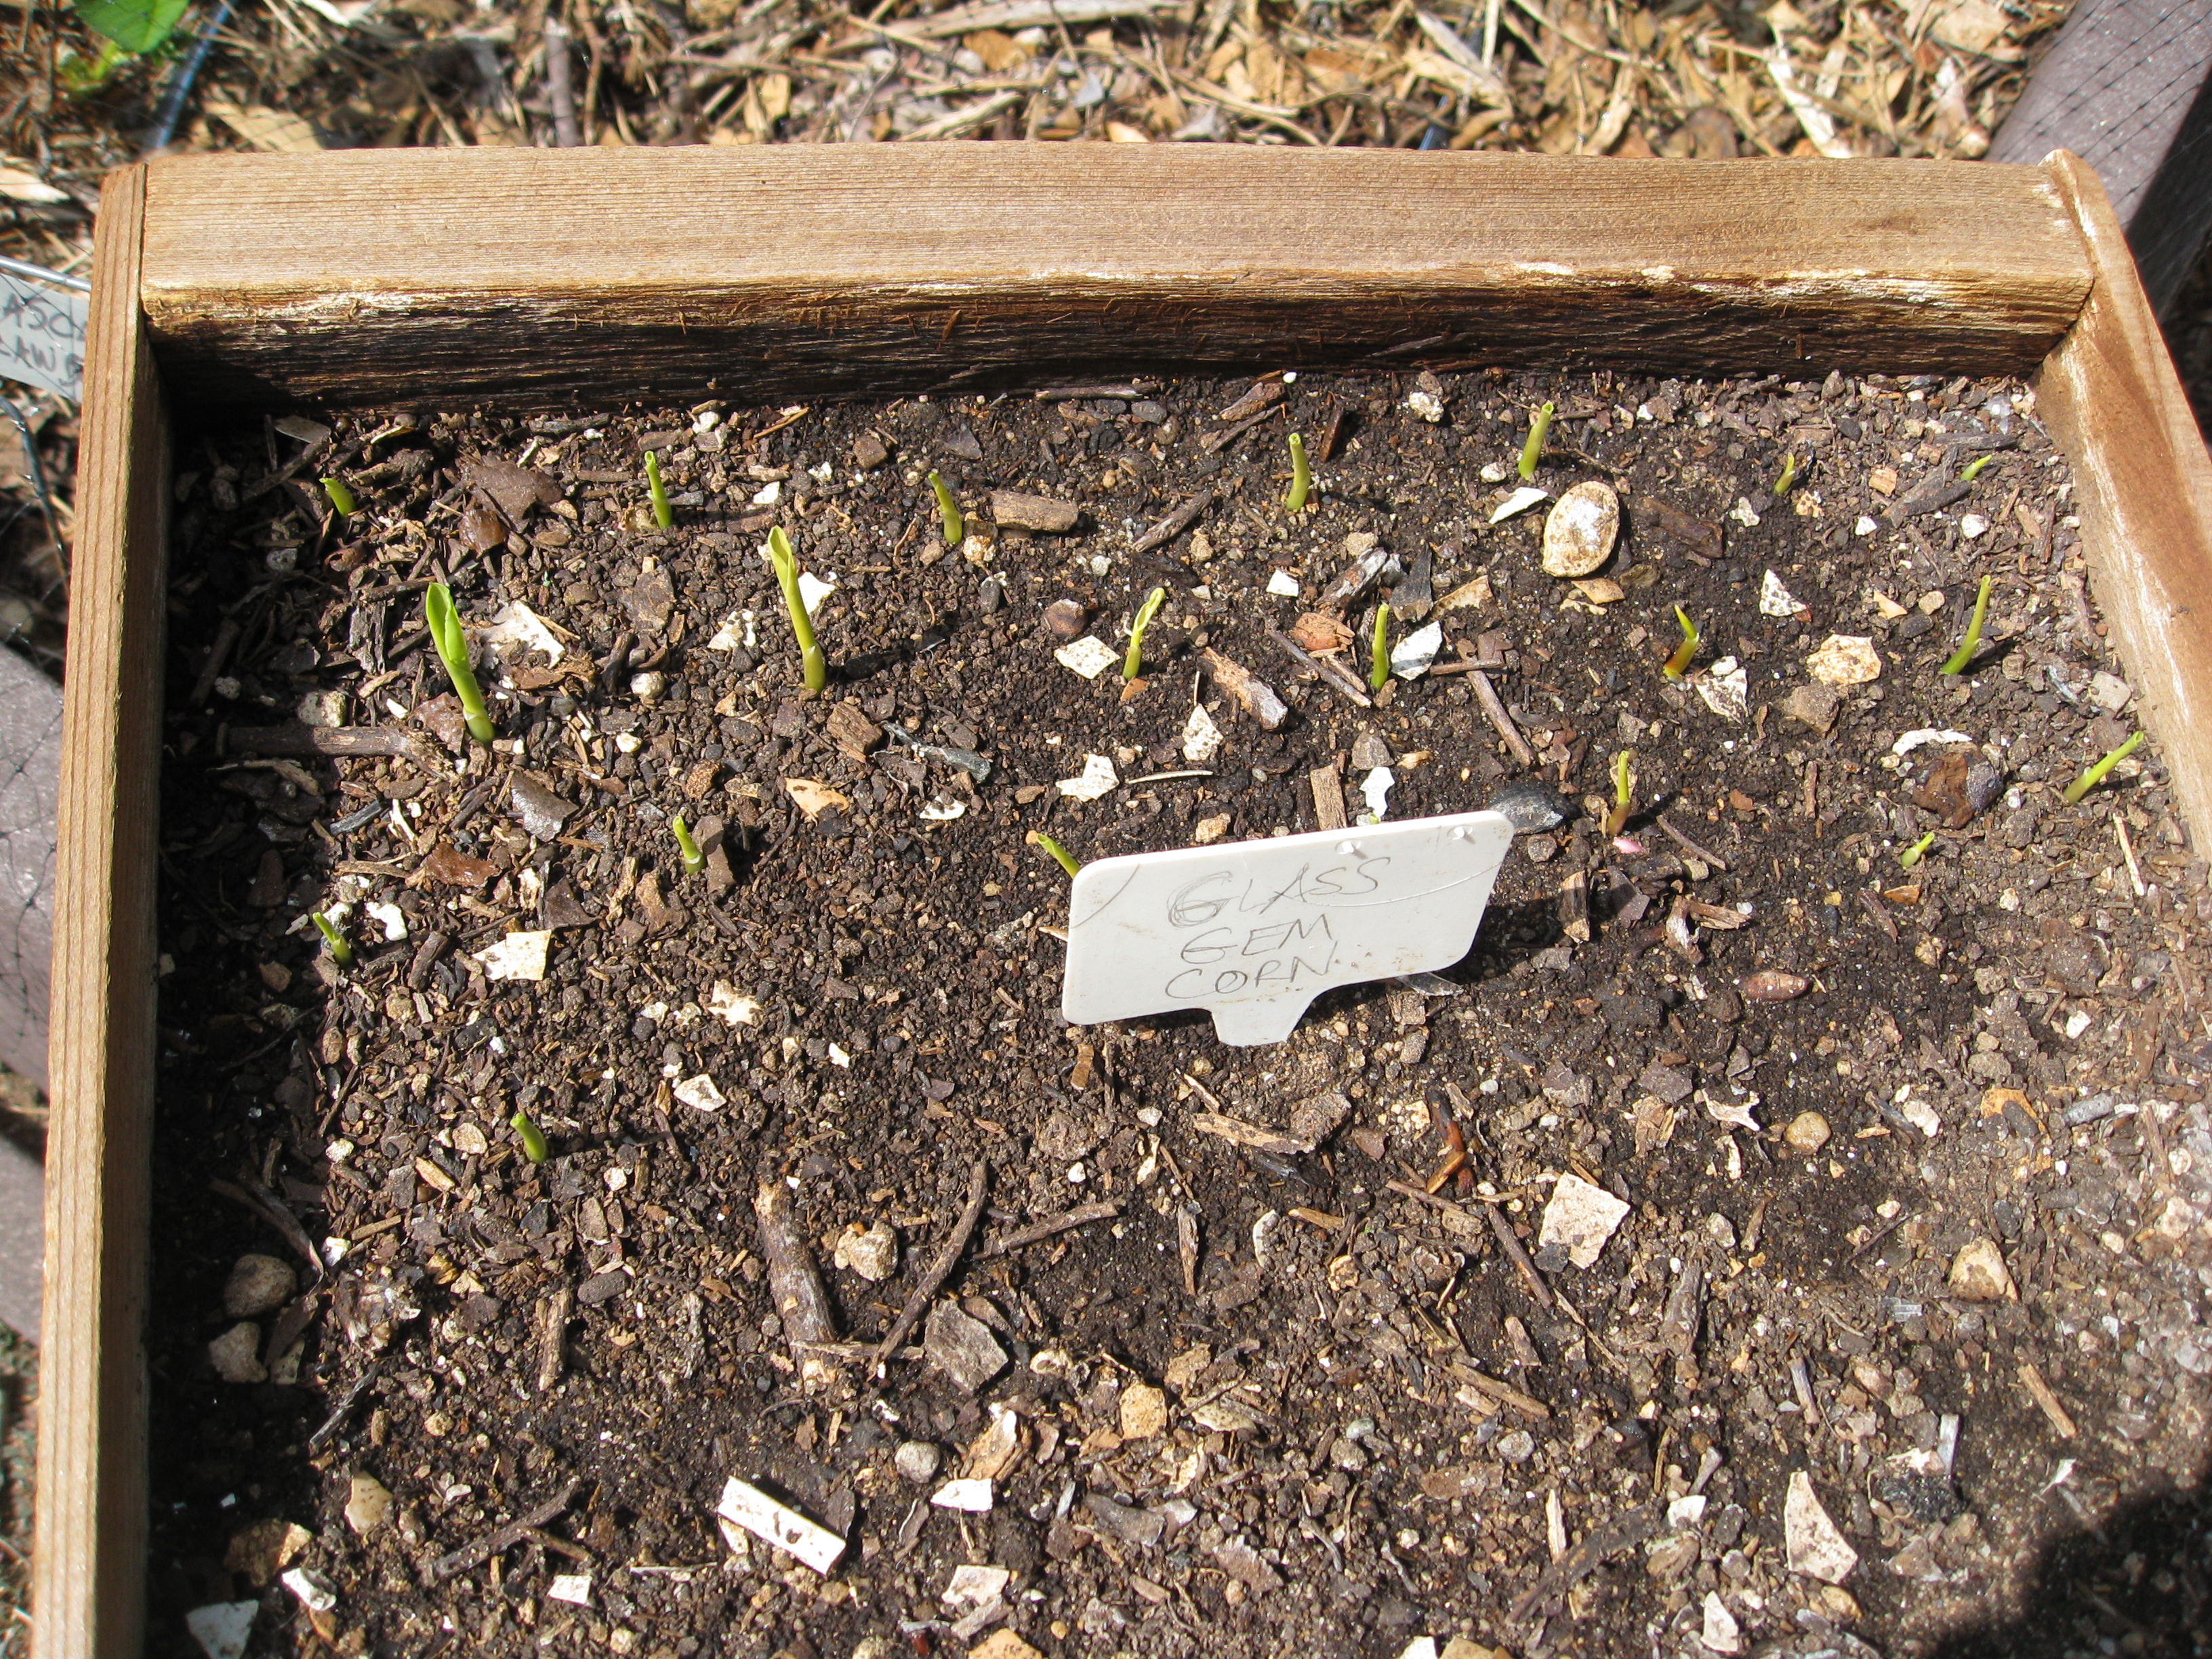 Starting popcorn seeds in flats out in the sun. All 21 seeds sprouted.